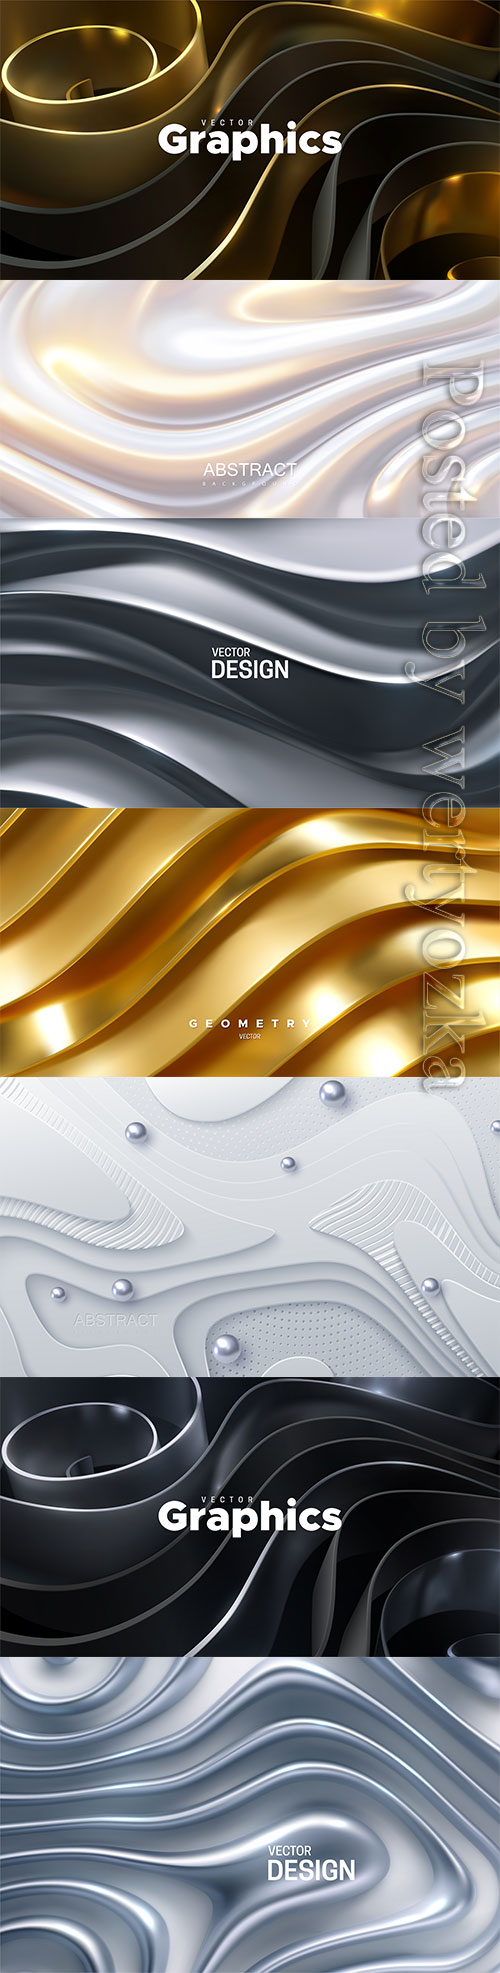 Luxury abstract vector backgrounds with golden lines